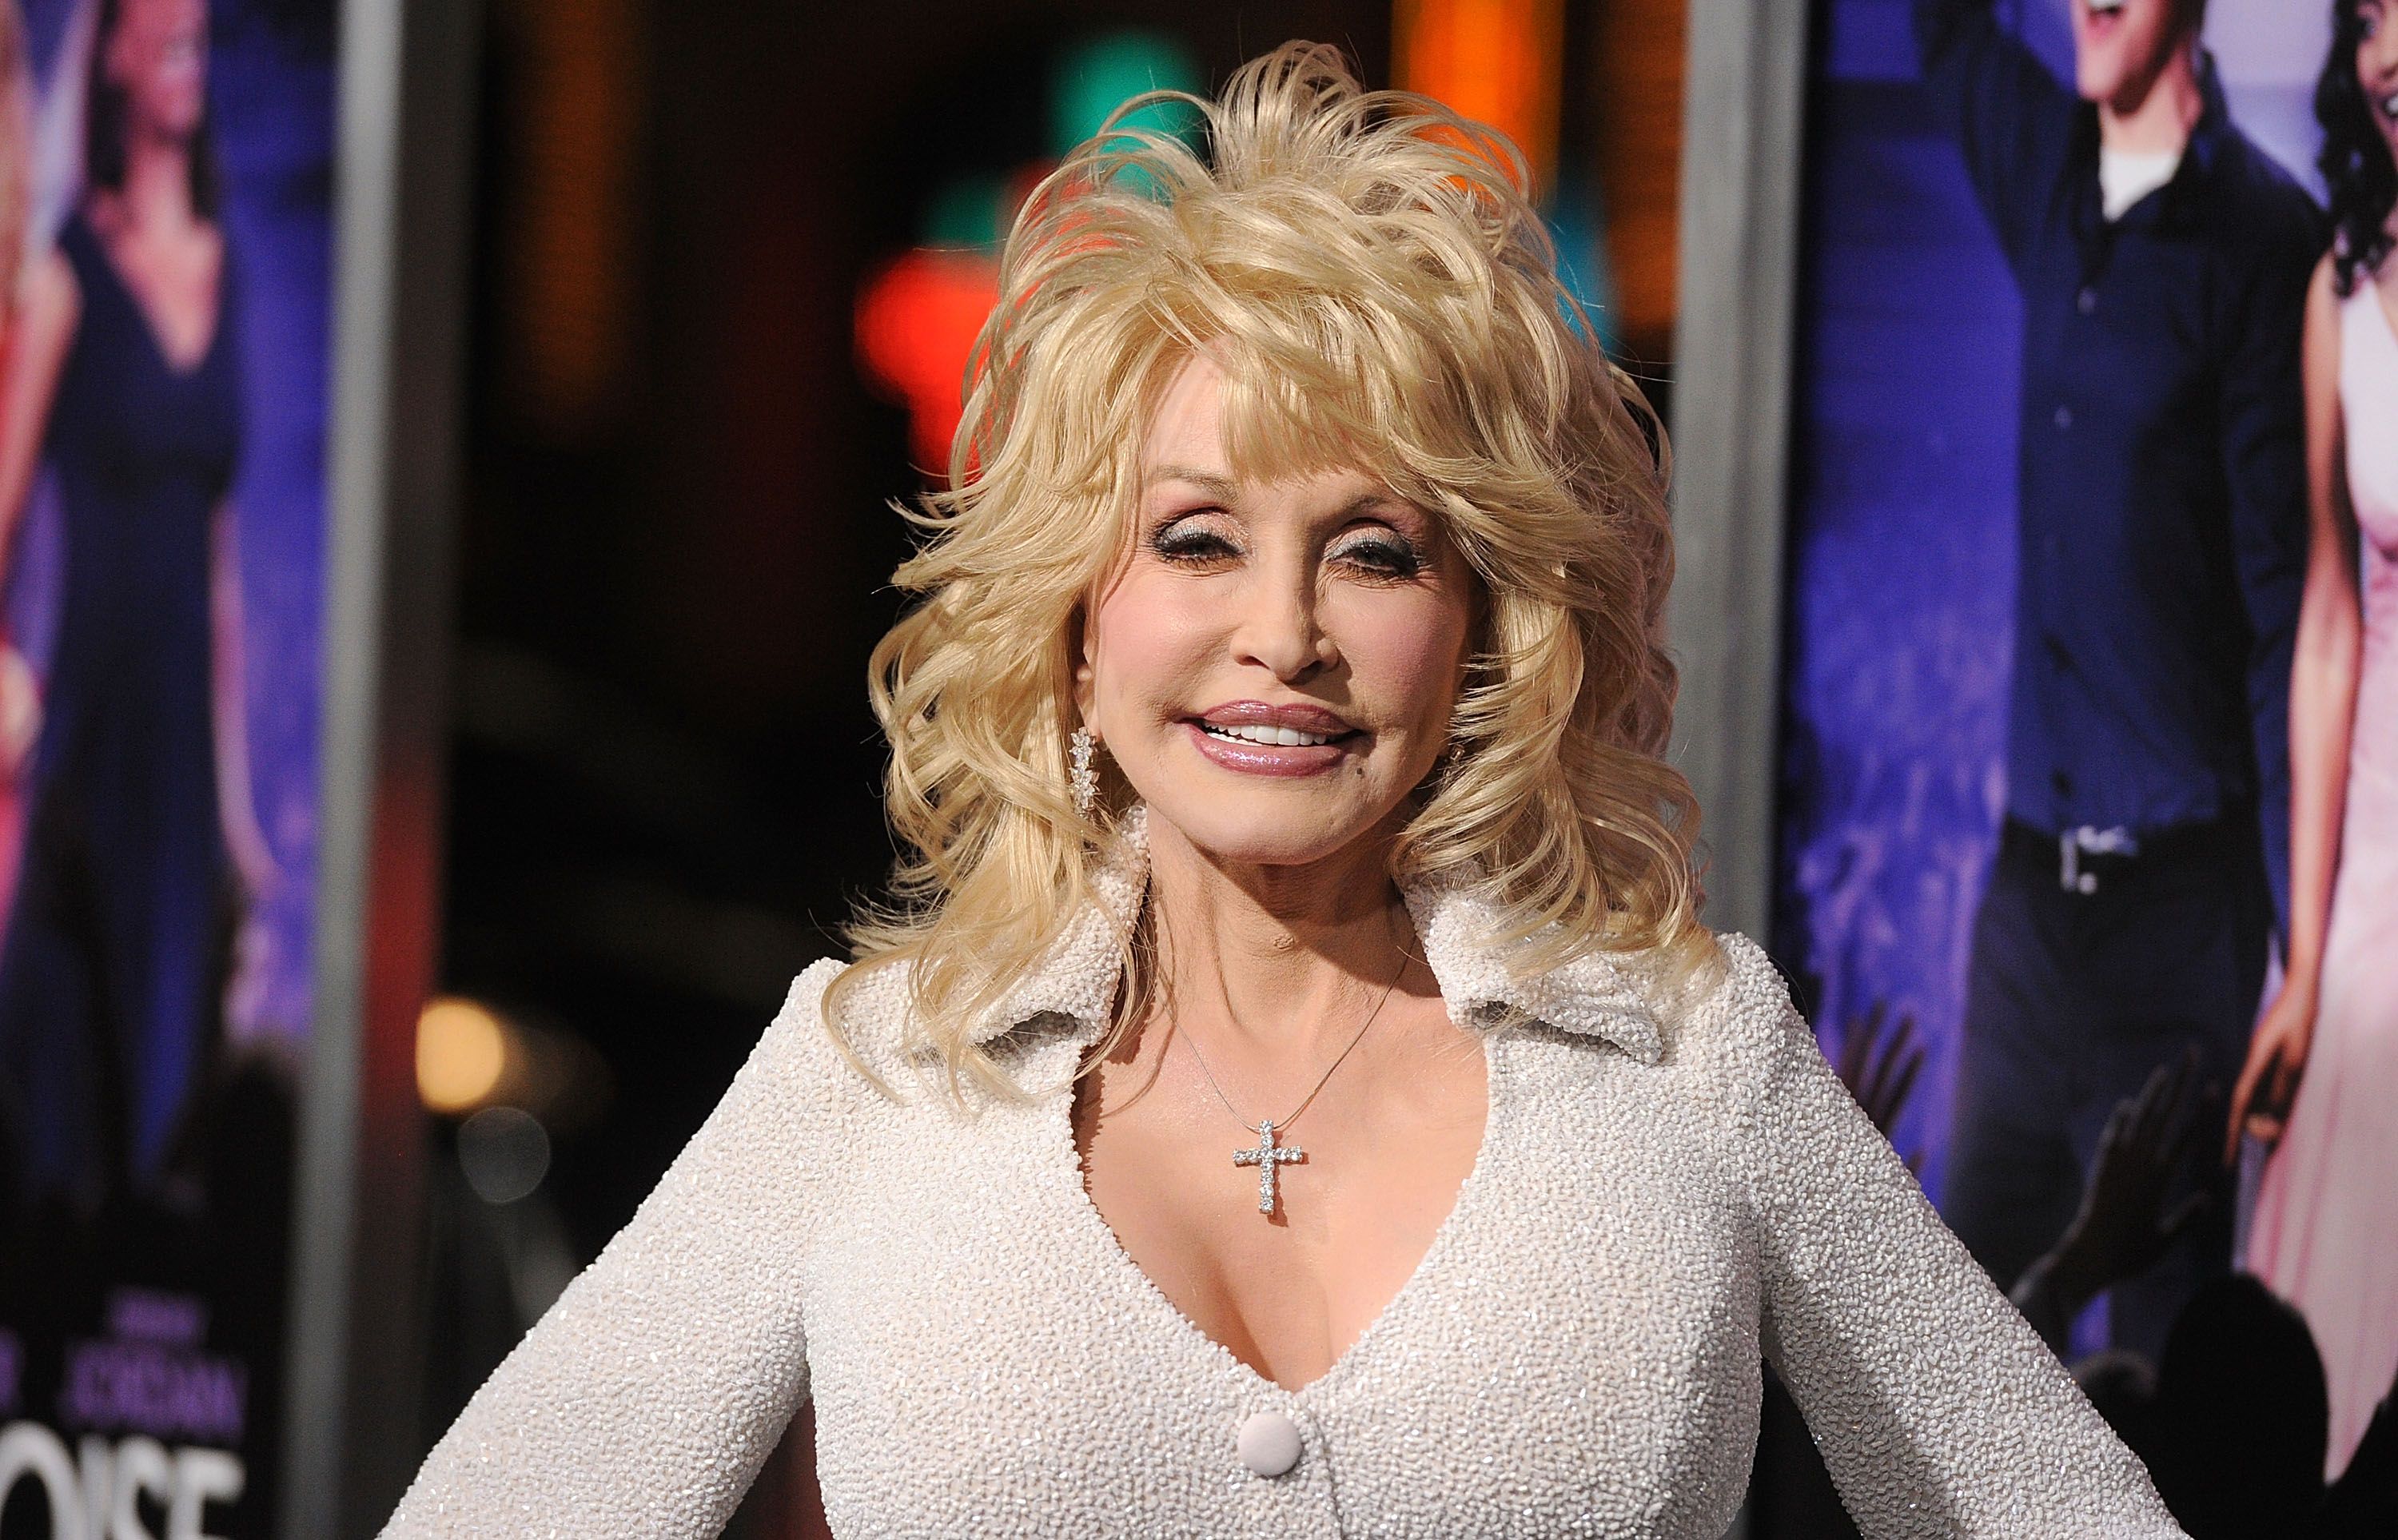 Dolly Parton during the "Joyful Noise" premiere at Grauman's Chinese Theatre on January 9, 2012, in Hollywood, California. | Source: Getty Images